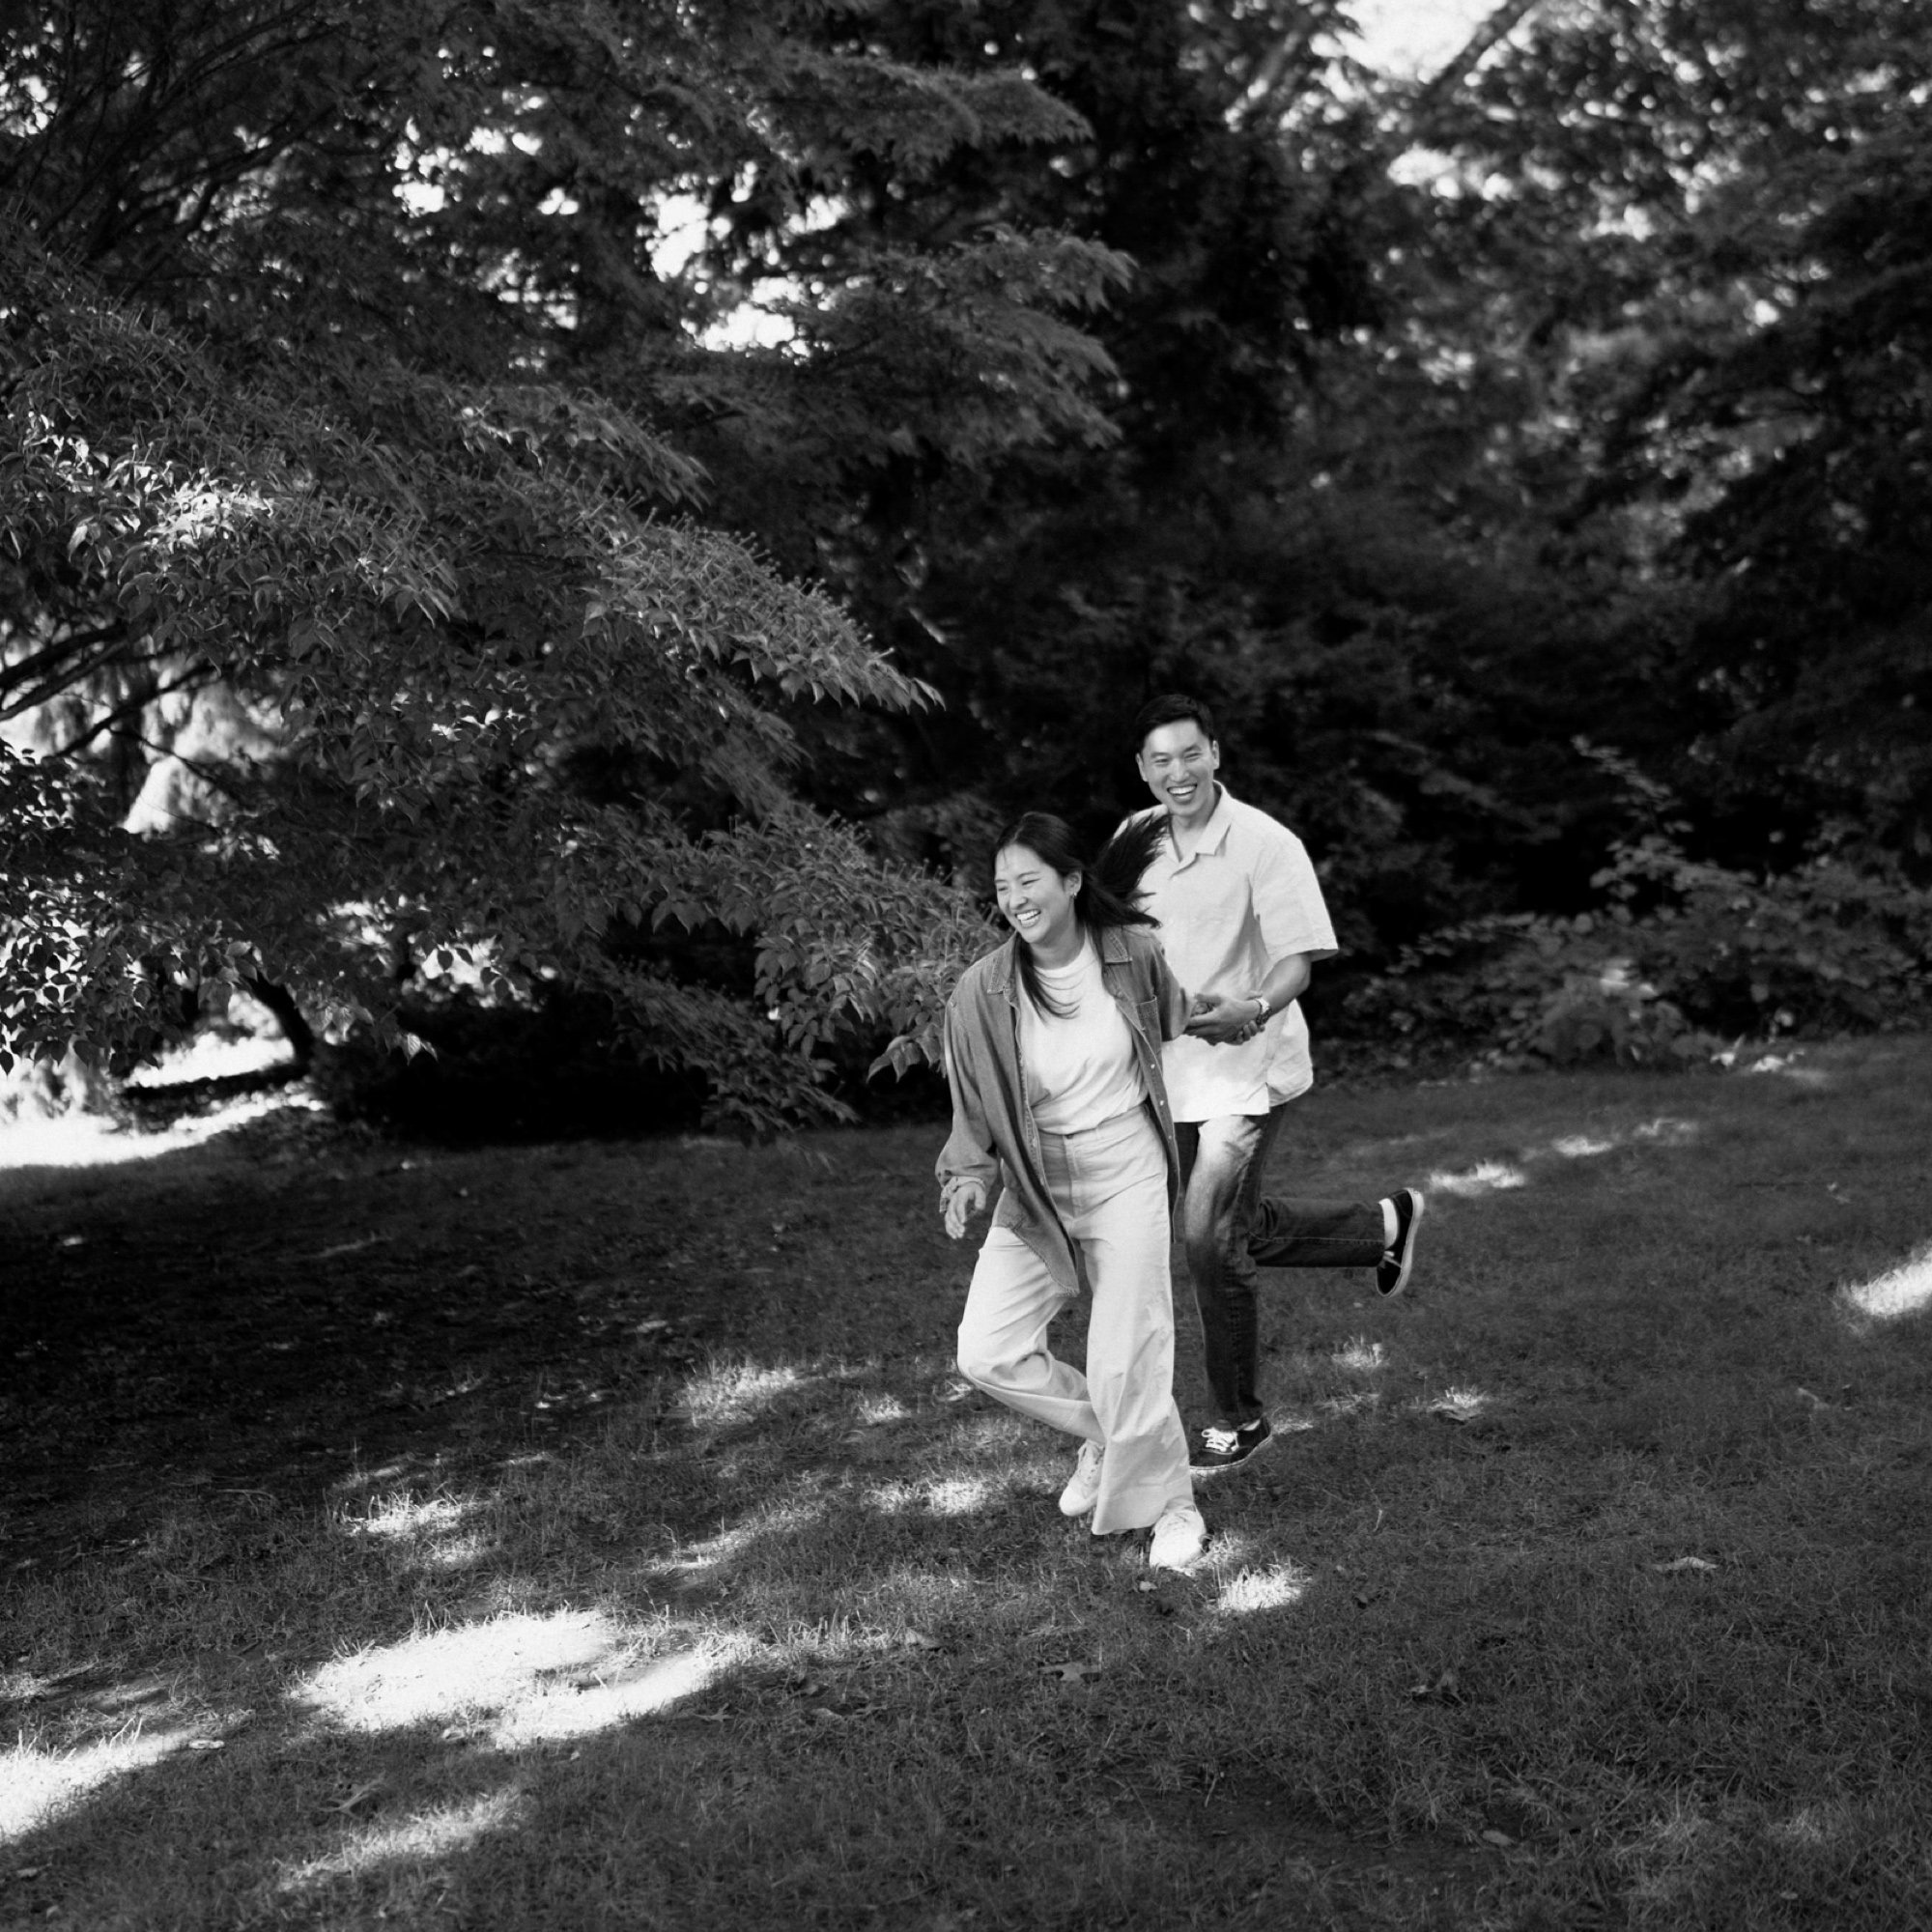 64_PREVIEW-179_Couple in the New Jersey Botanical Garden.jpg